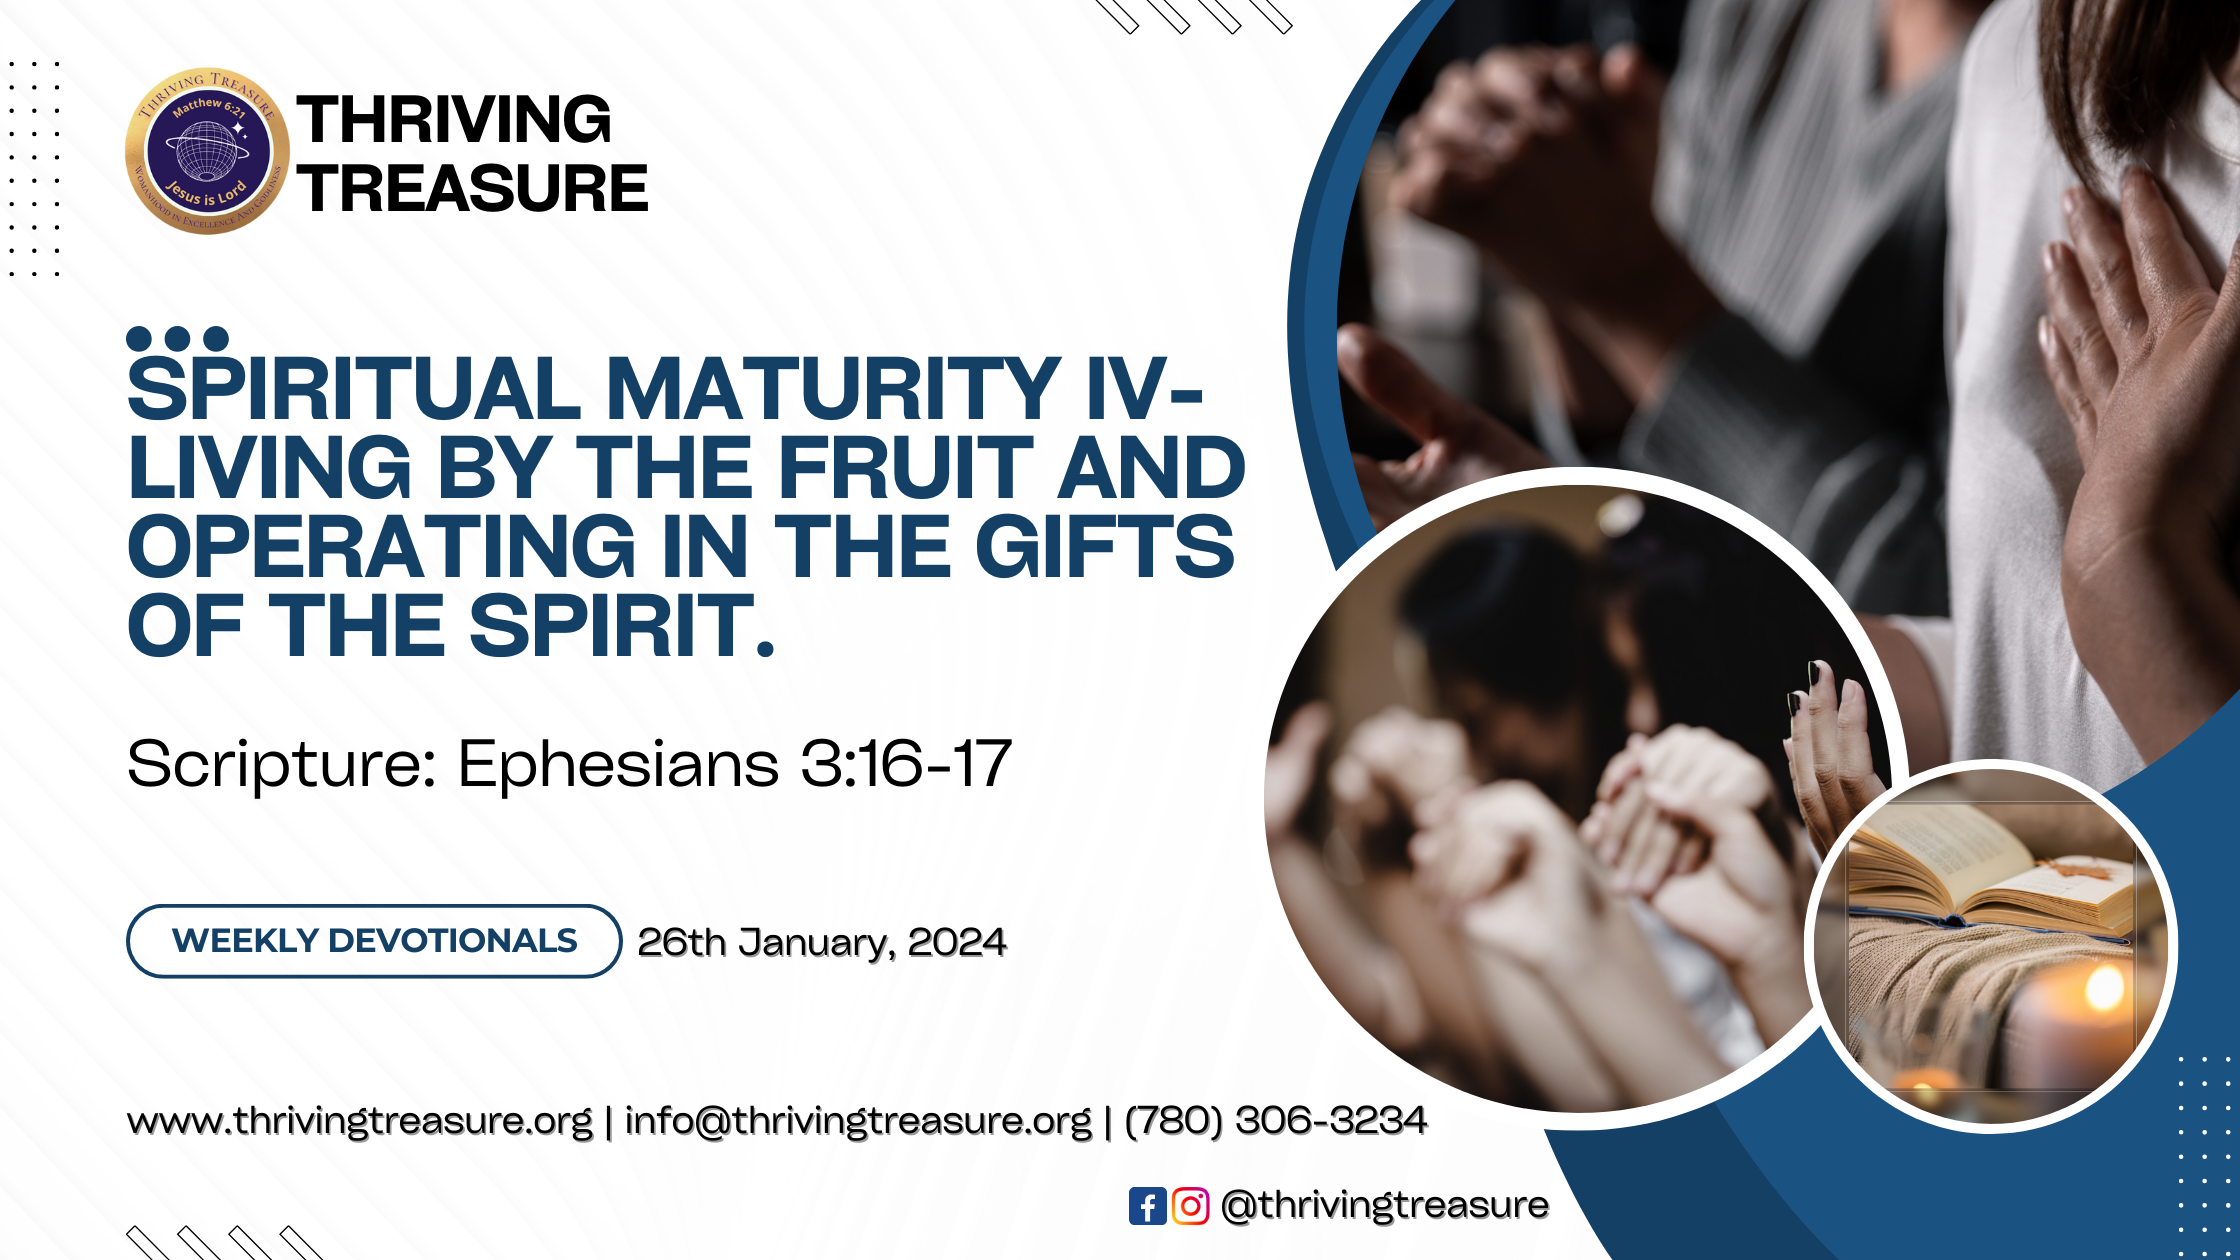 You are currently viewing SPIRITUAL MATURITY IV- LIVING BY THE FRUIT AND OPERATING IN THE GIFTS OF THE SPIRIT